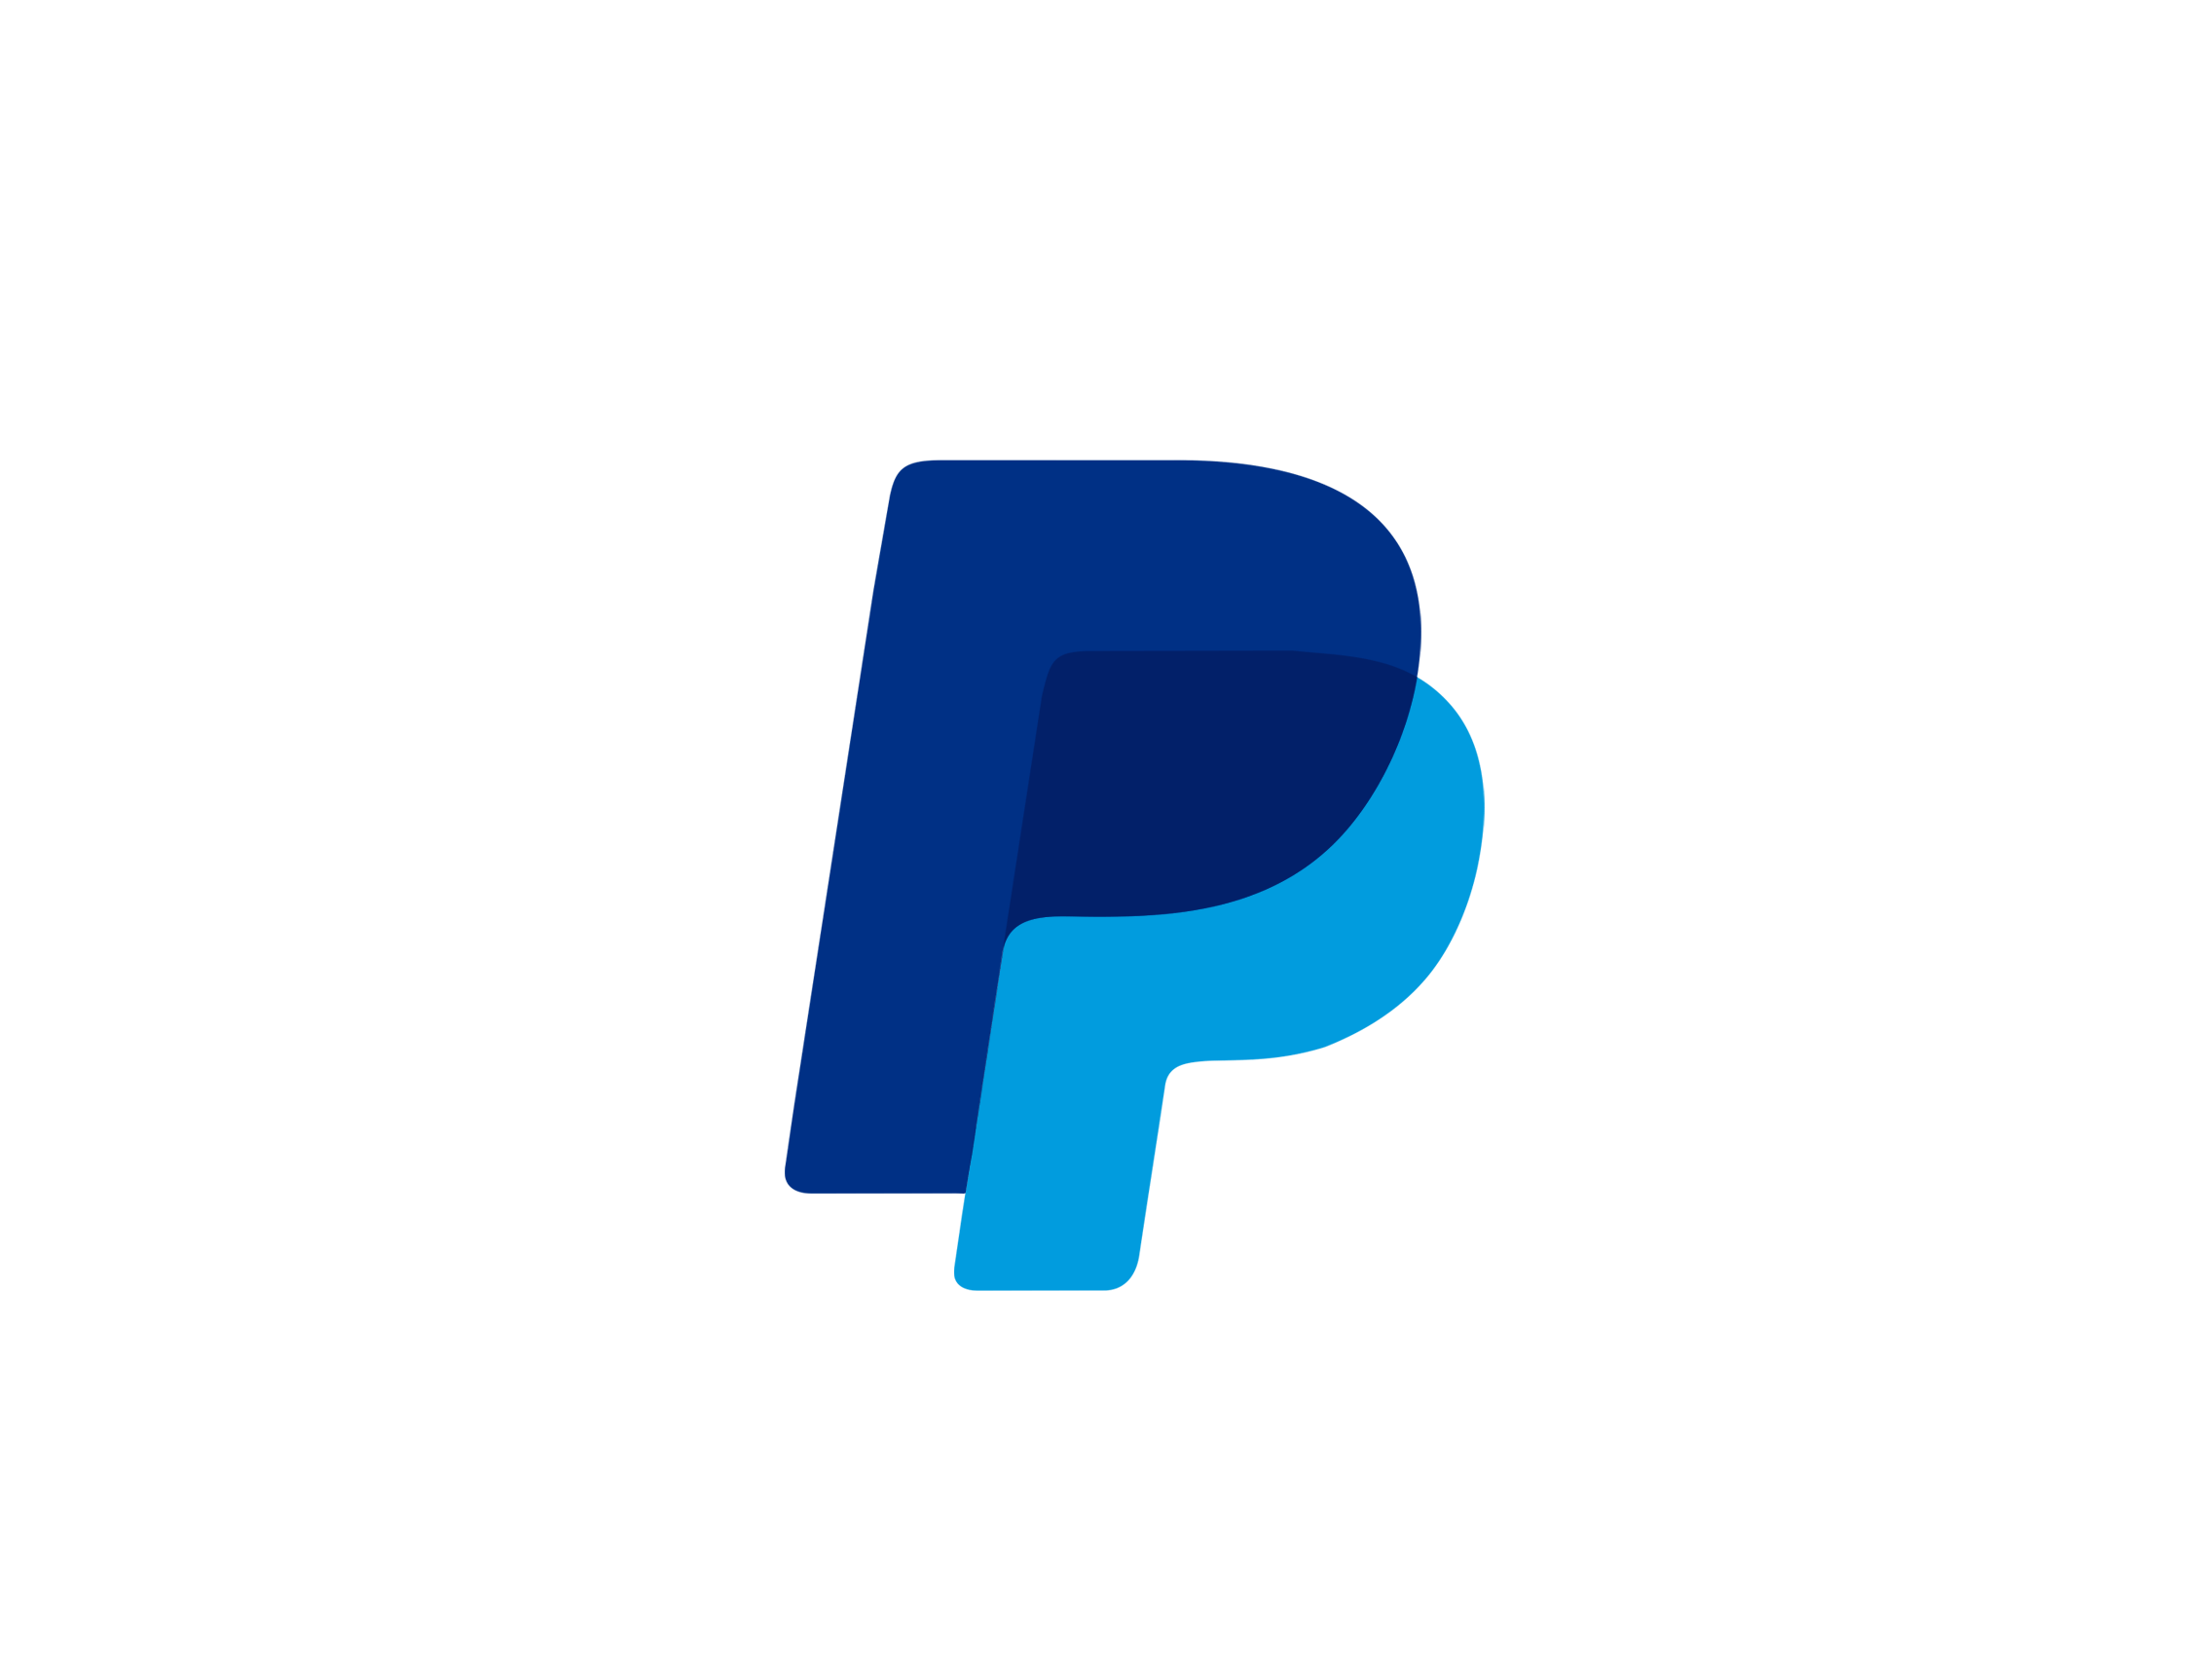 High Resolution PayPal Logo - PayPal logo PNG images free download